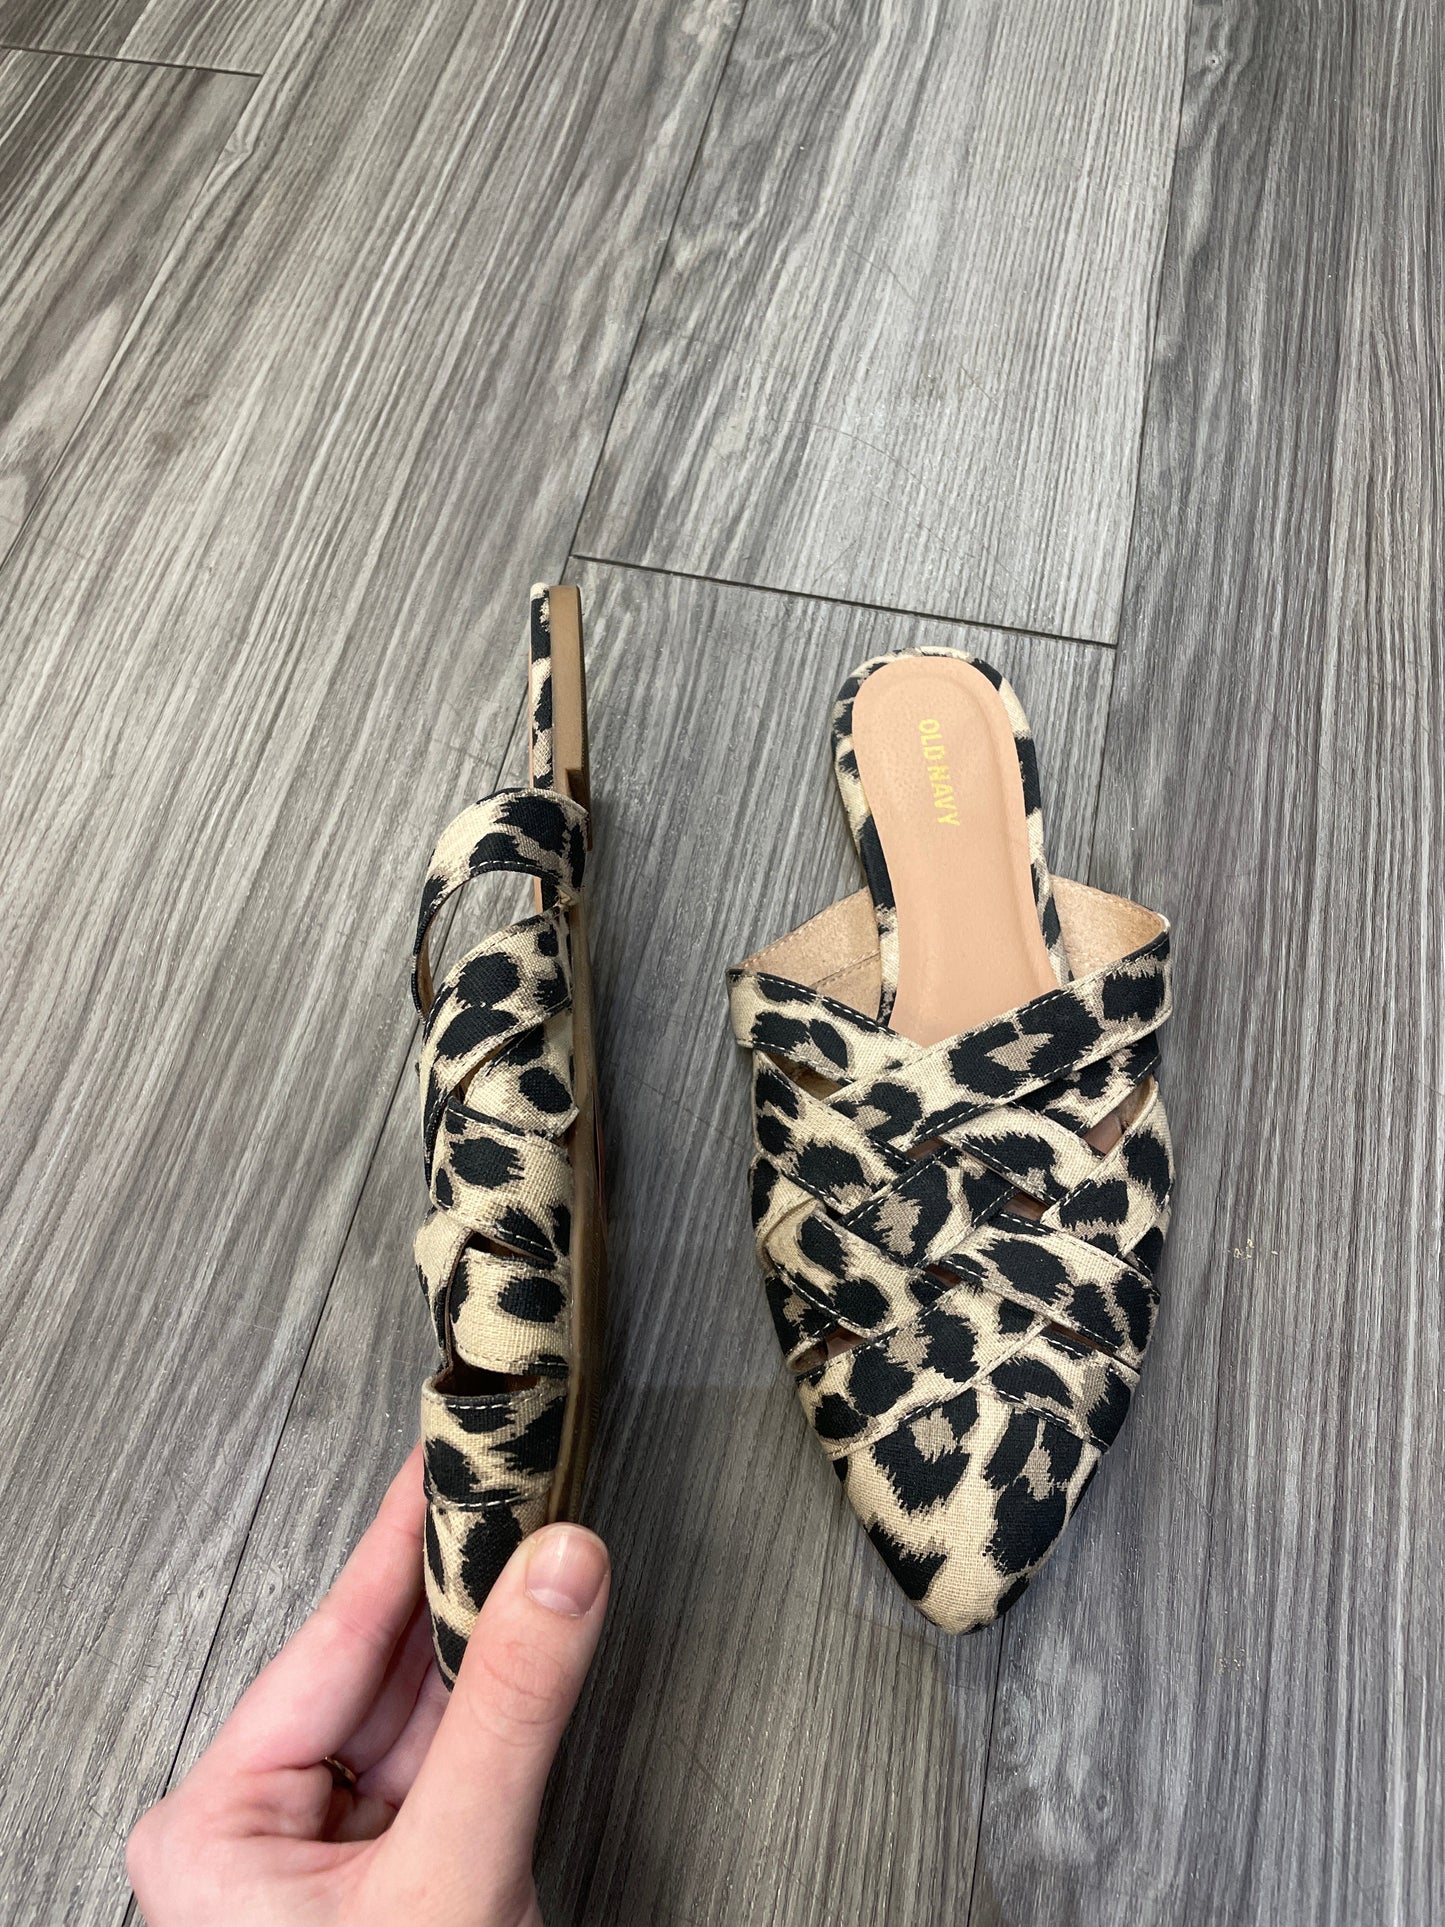 Shoes Flats Mule & Slide By Old Navy  Size: 9